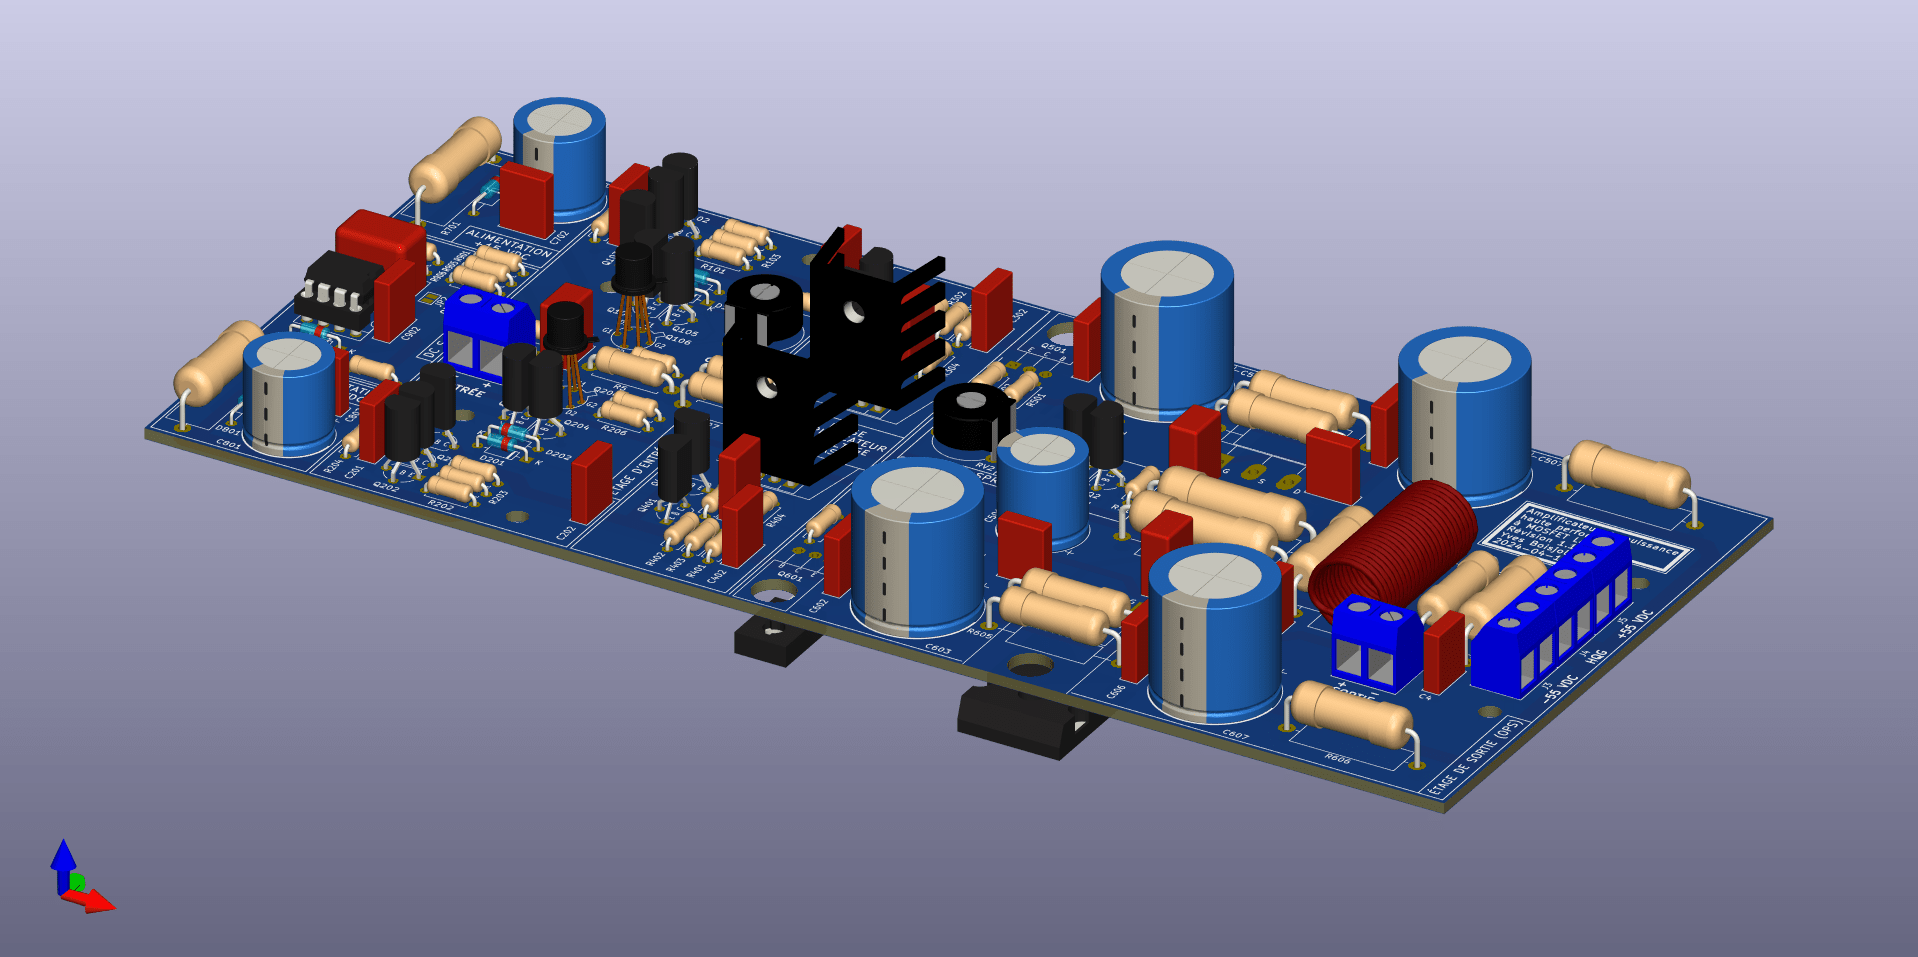 05-Figure 14.17.Rev1.1.kicad_pro-ISO.png